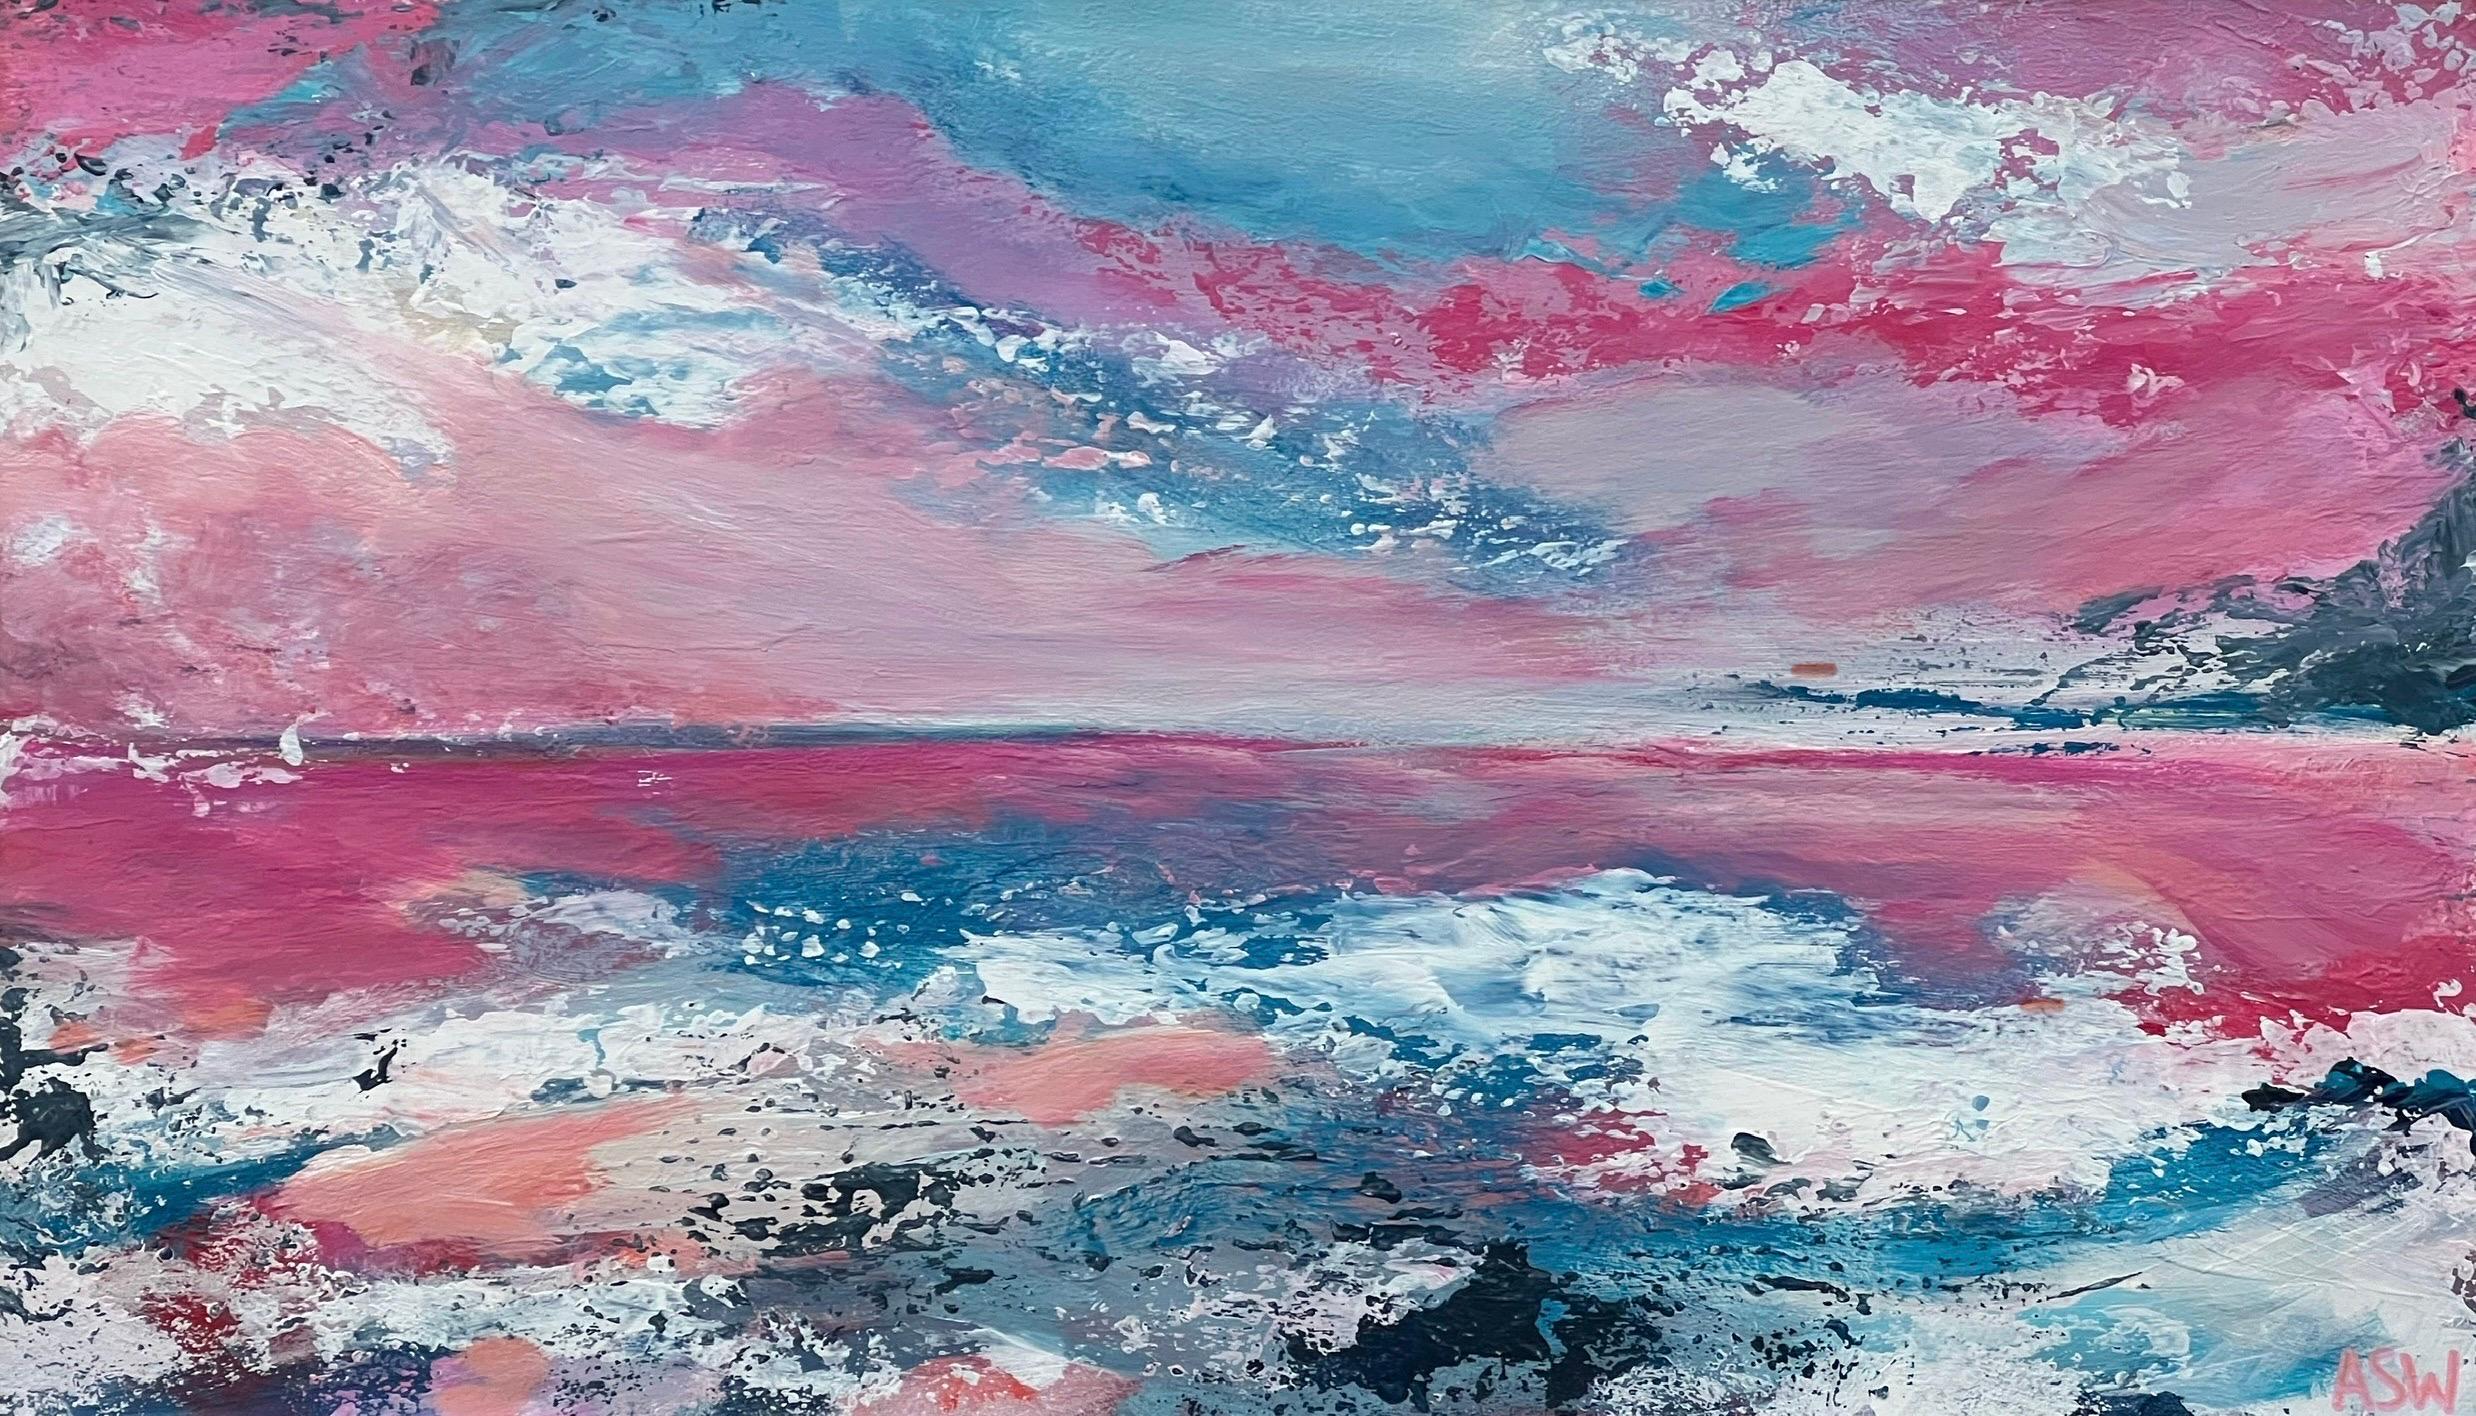 Abstract Landscape Seascape Painting with Pink & Blue Sky by British Artist For Sale 3